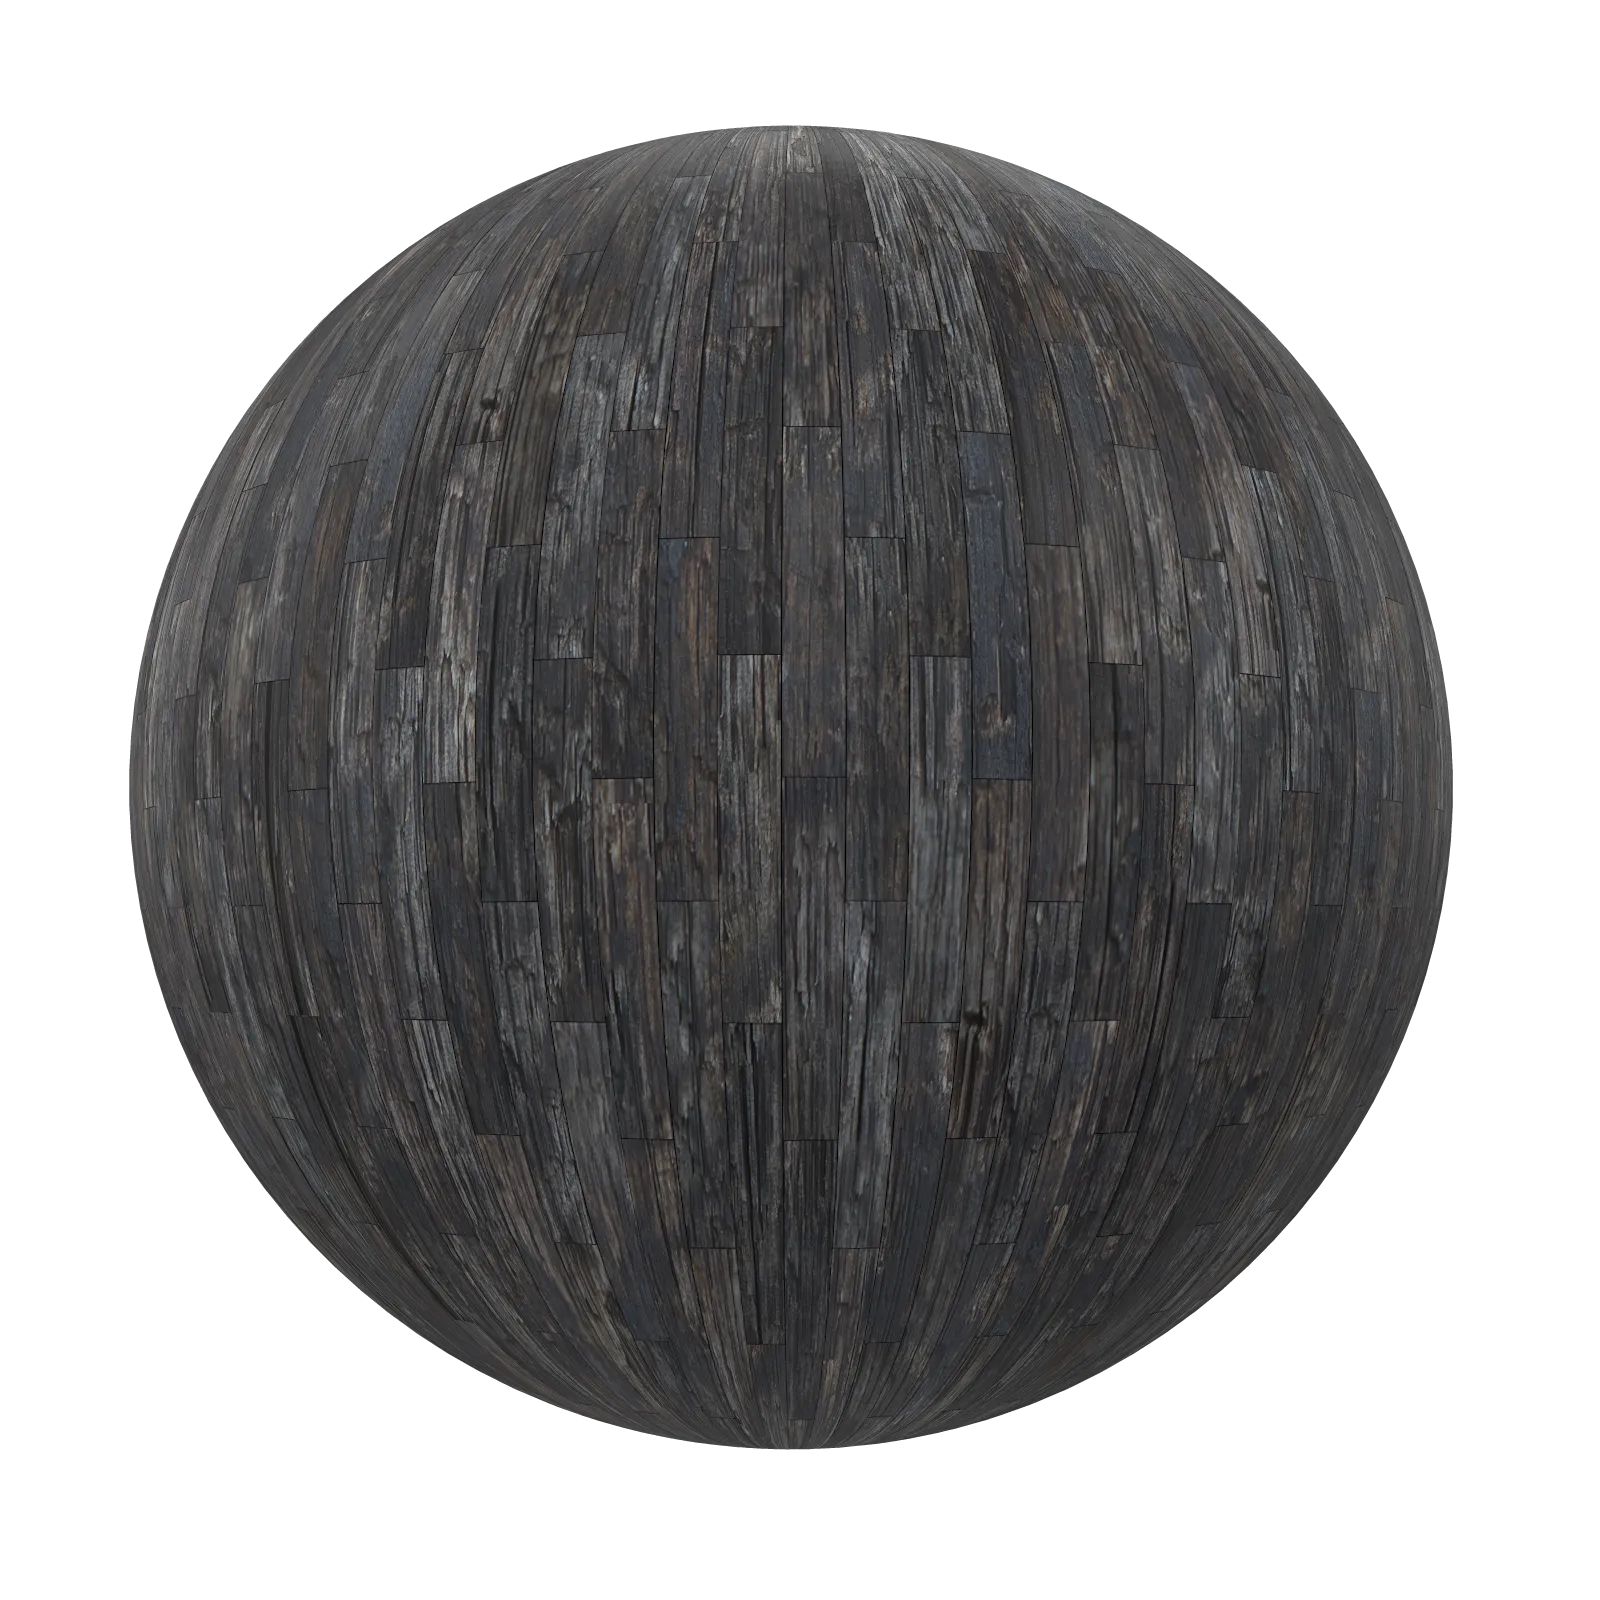 TEXTURES – WOOD – Old Wood Tiles 22